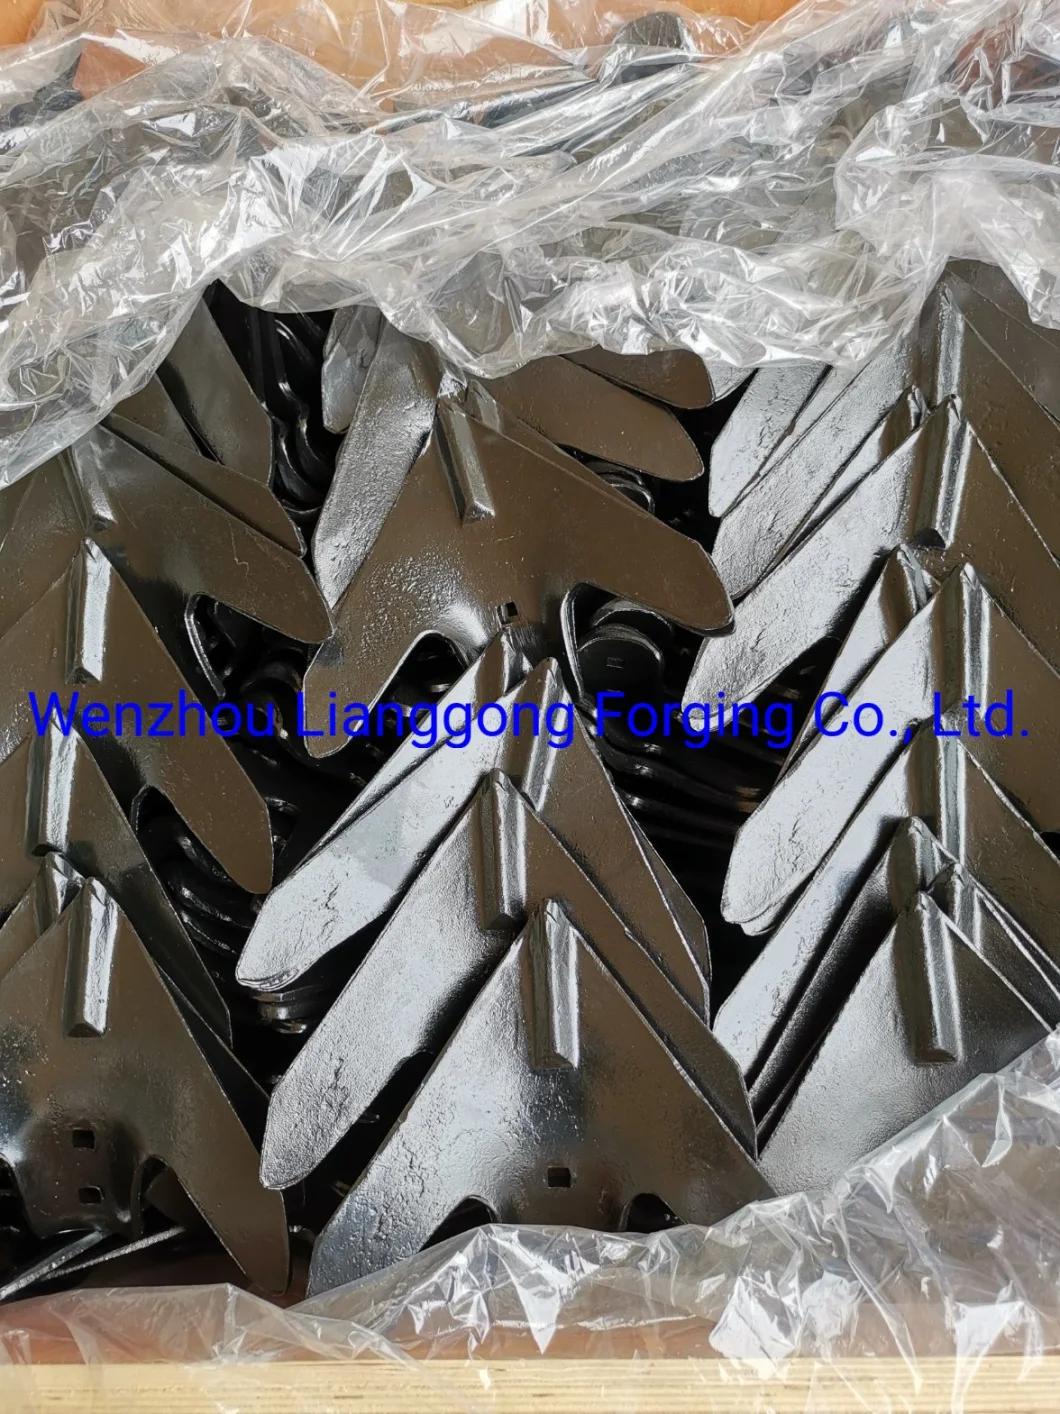 Forged Cultivator Tines with Forging Process Used in Agricultural Machinery